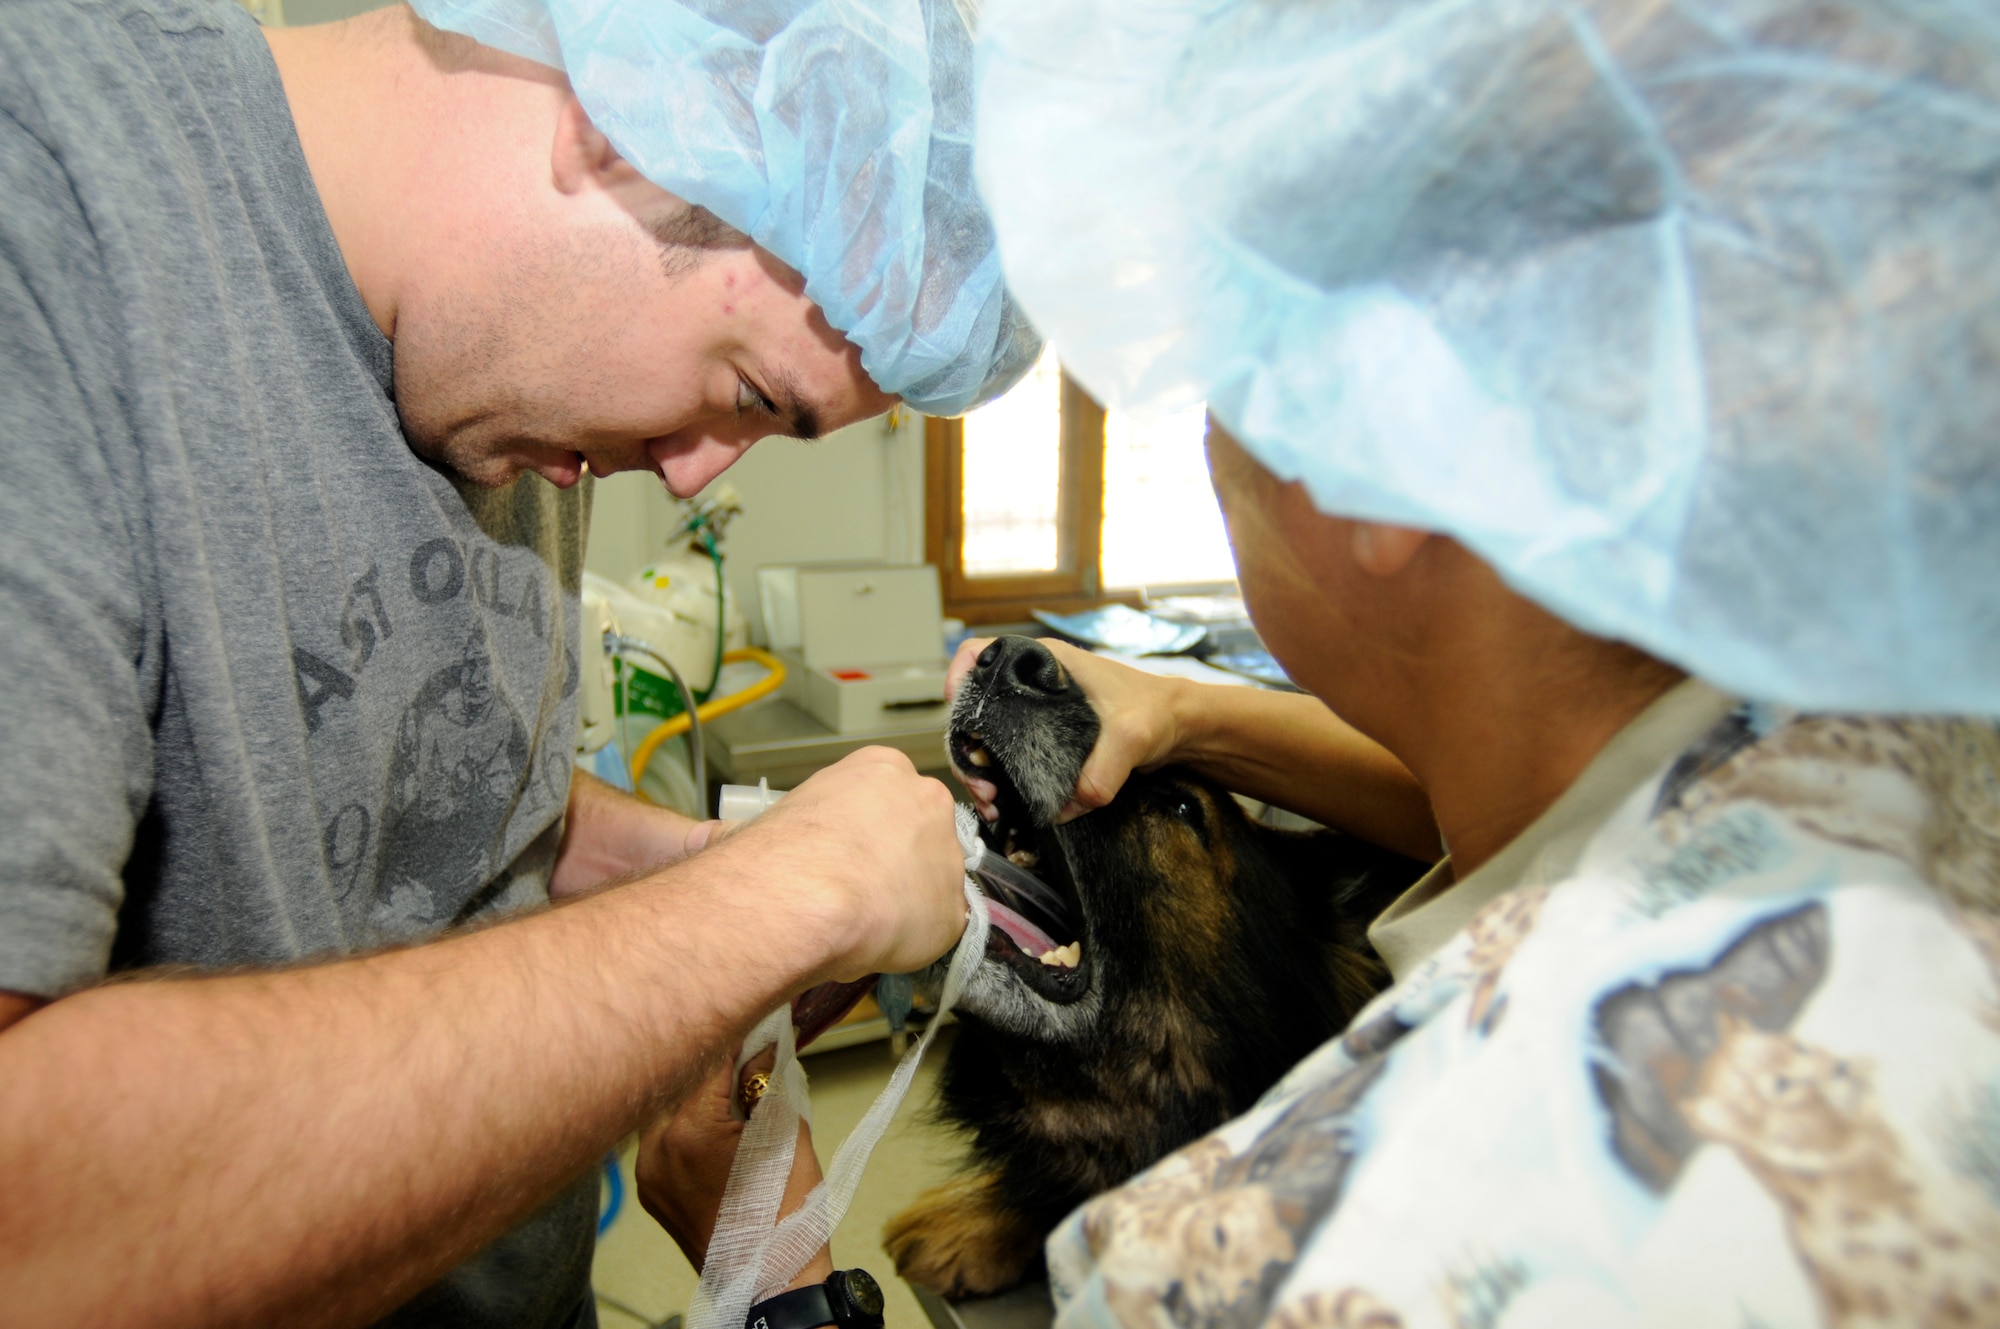 Staff Sgt. Eric Bonner, a 39th Security Forces Squadron military working dog handler, intubates Suli, his 9-year-old German shepherd partner, prior to Suli’s prophylactic gastropexy, also referred to as stomach tacking, to prevent gastric torsion, or twisting of the stomach Thursday, Aug. 27, 2009 at the Veterinary Clinic, Incirlik Air Base, Turkey.  The surgery was completed after a recommendation by the Army, the service in charge of medical care for the military working dog program, for all dogs in the program to receive the surgery.  Stomach twisting is caused by gastric dilatation and volvulus, commonly known as bloat, the second leading killer of dogs after cancer.  (U.S. Air Force photo/Staff Sgt. Raymond Hoy)